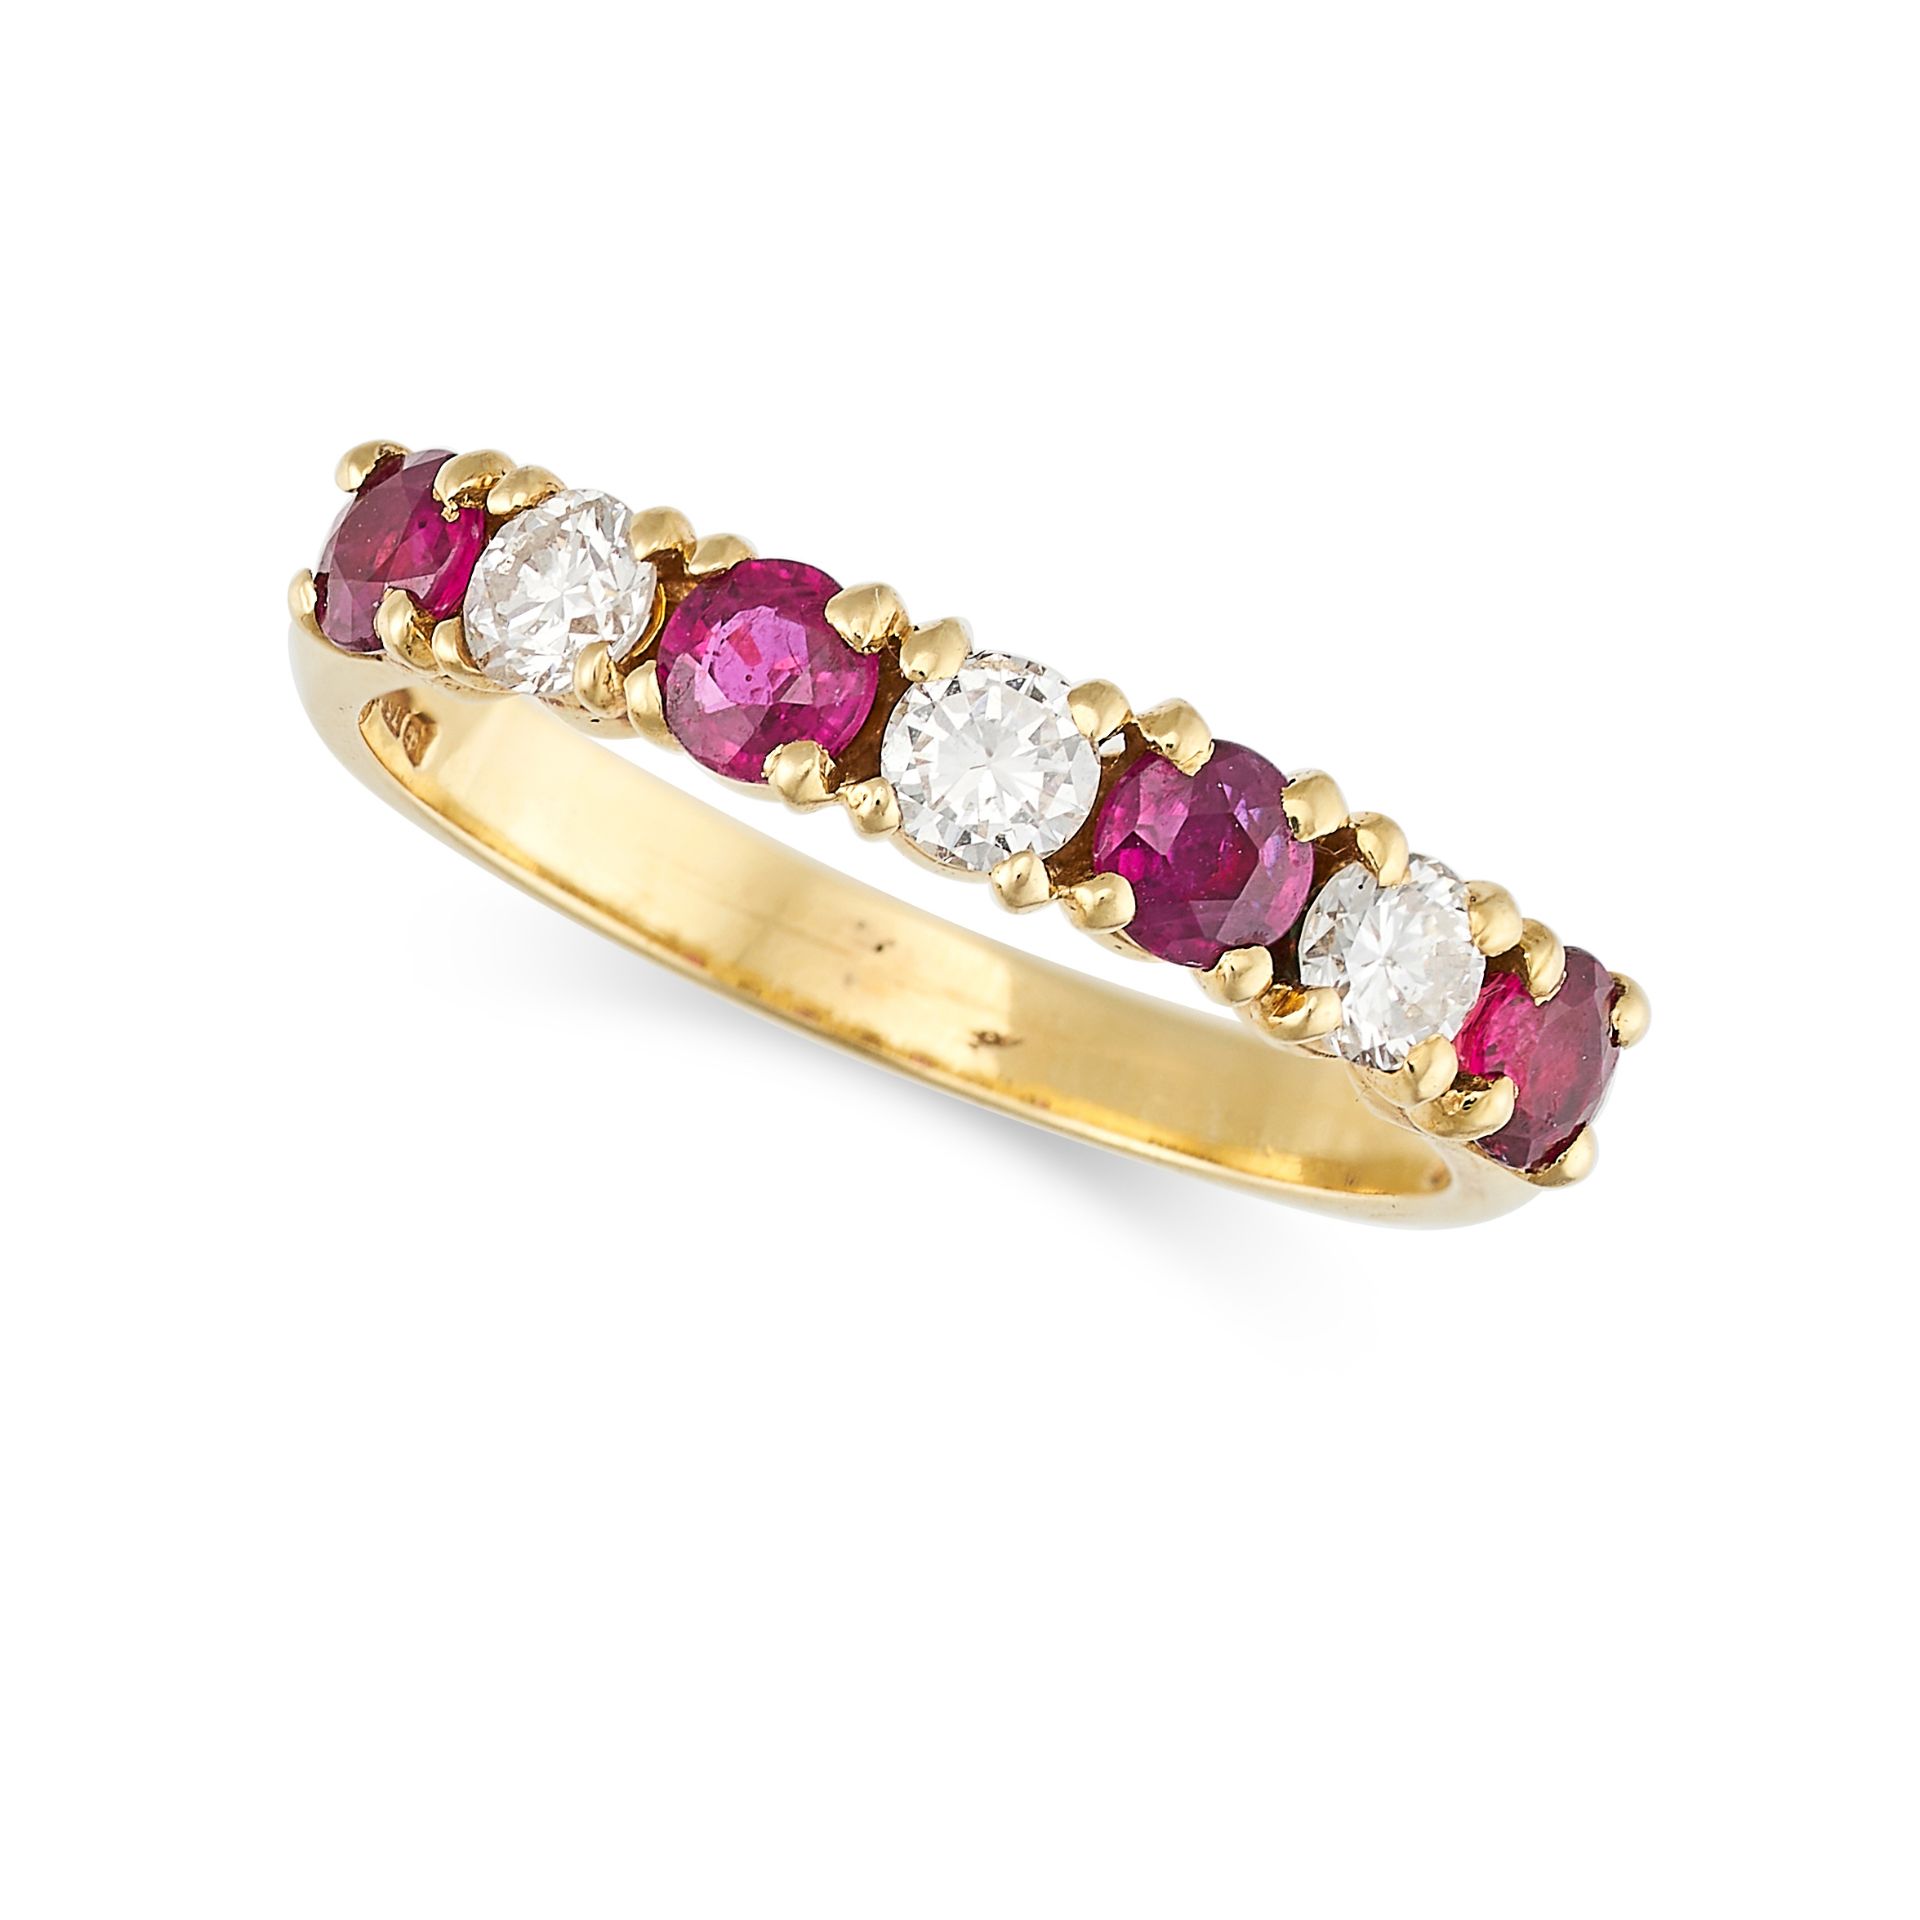 A RUBY AND DIAMOND HALF ETERNITY RING in 18ct yellow gold, set with a row of alternating round br...